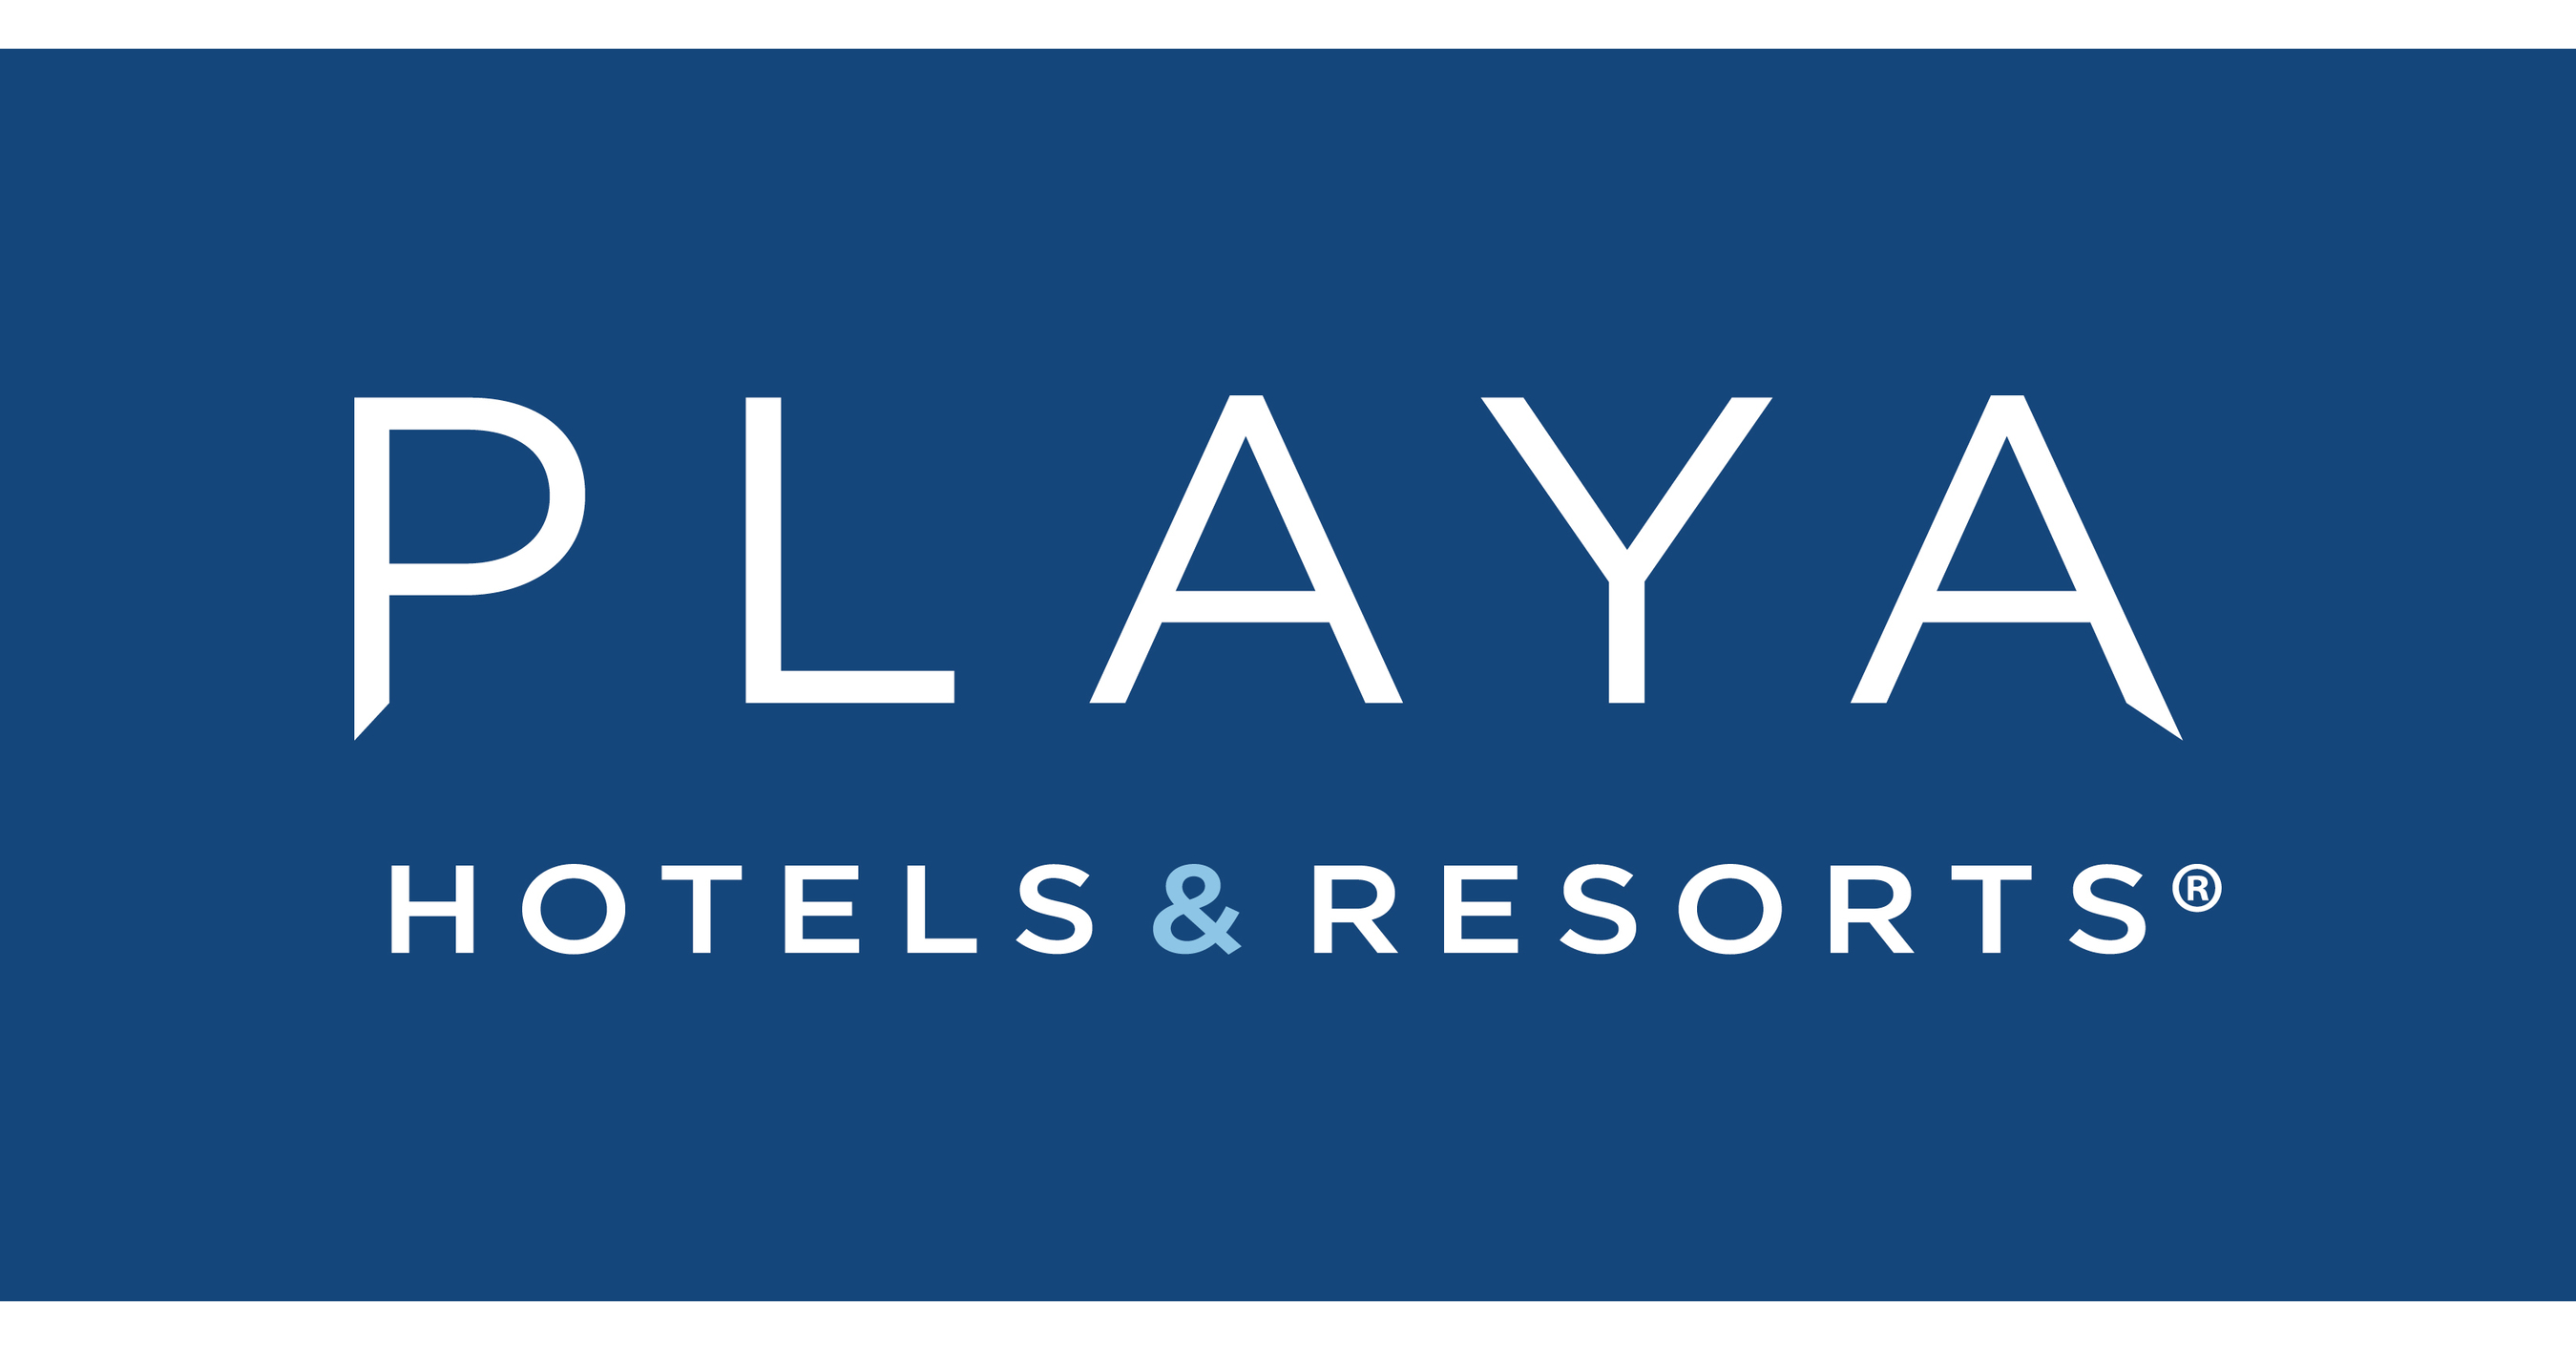 PLAYA HOTELS & RESORTS COLLABORATES WITH MARRIOTT INTERNATIONAL TO BRING THE LUXURY COLLECTION BRAND TO CAP CANA